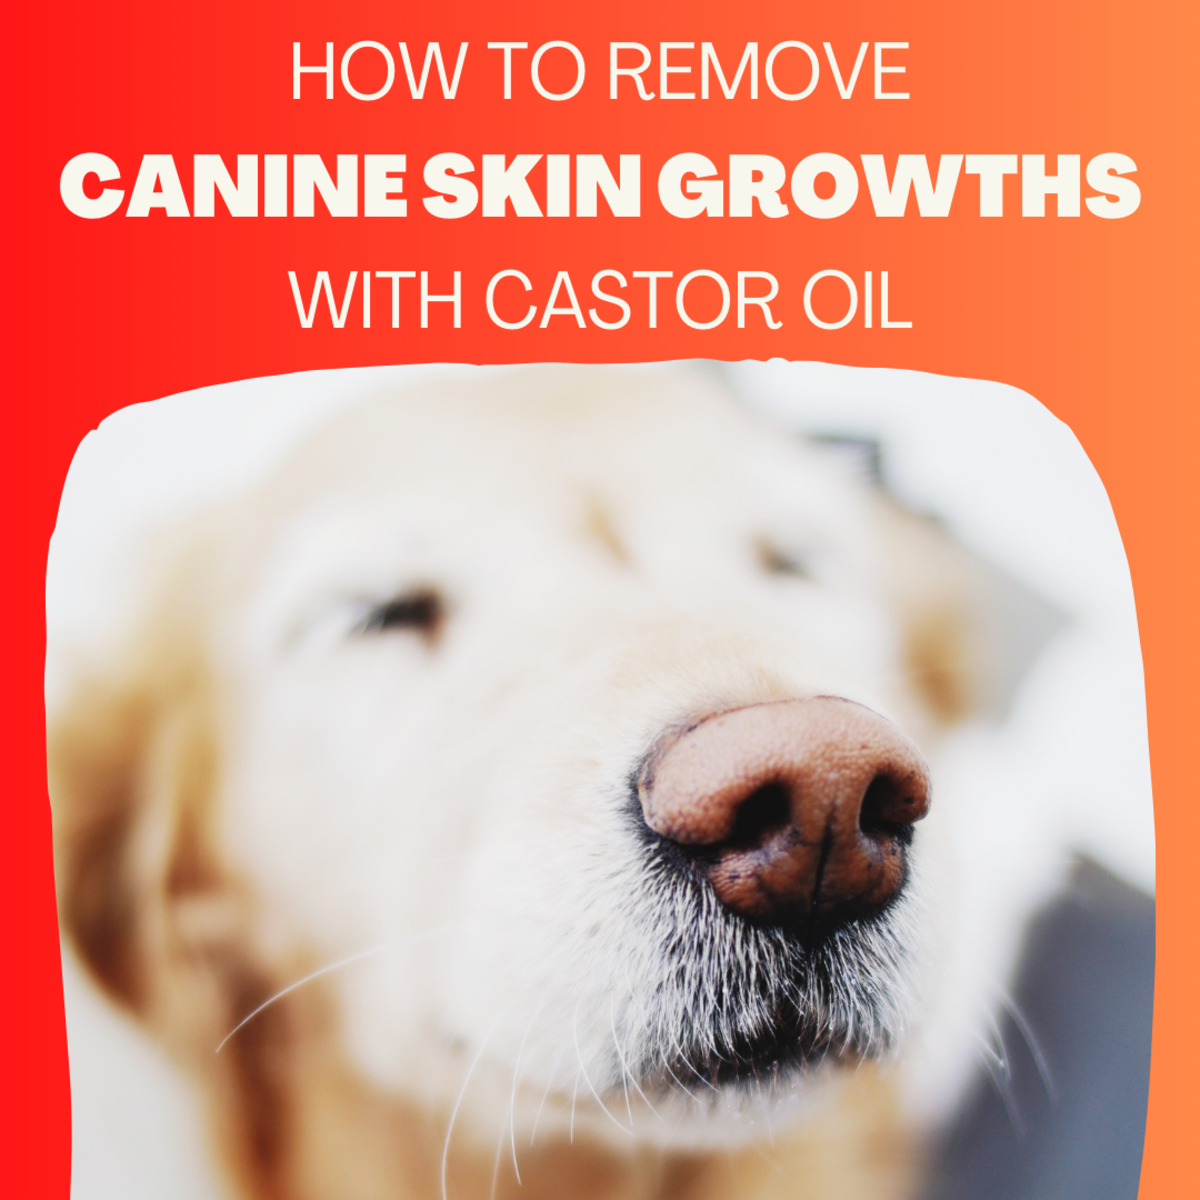 I removed a benign tumor from my dog's nose using castor oil. Read on to learn how. 